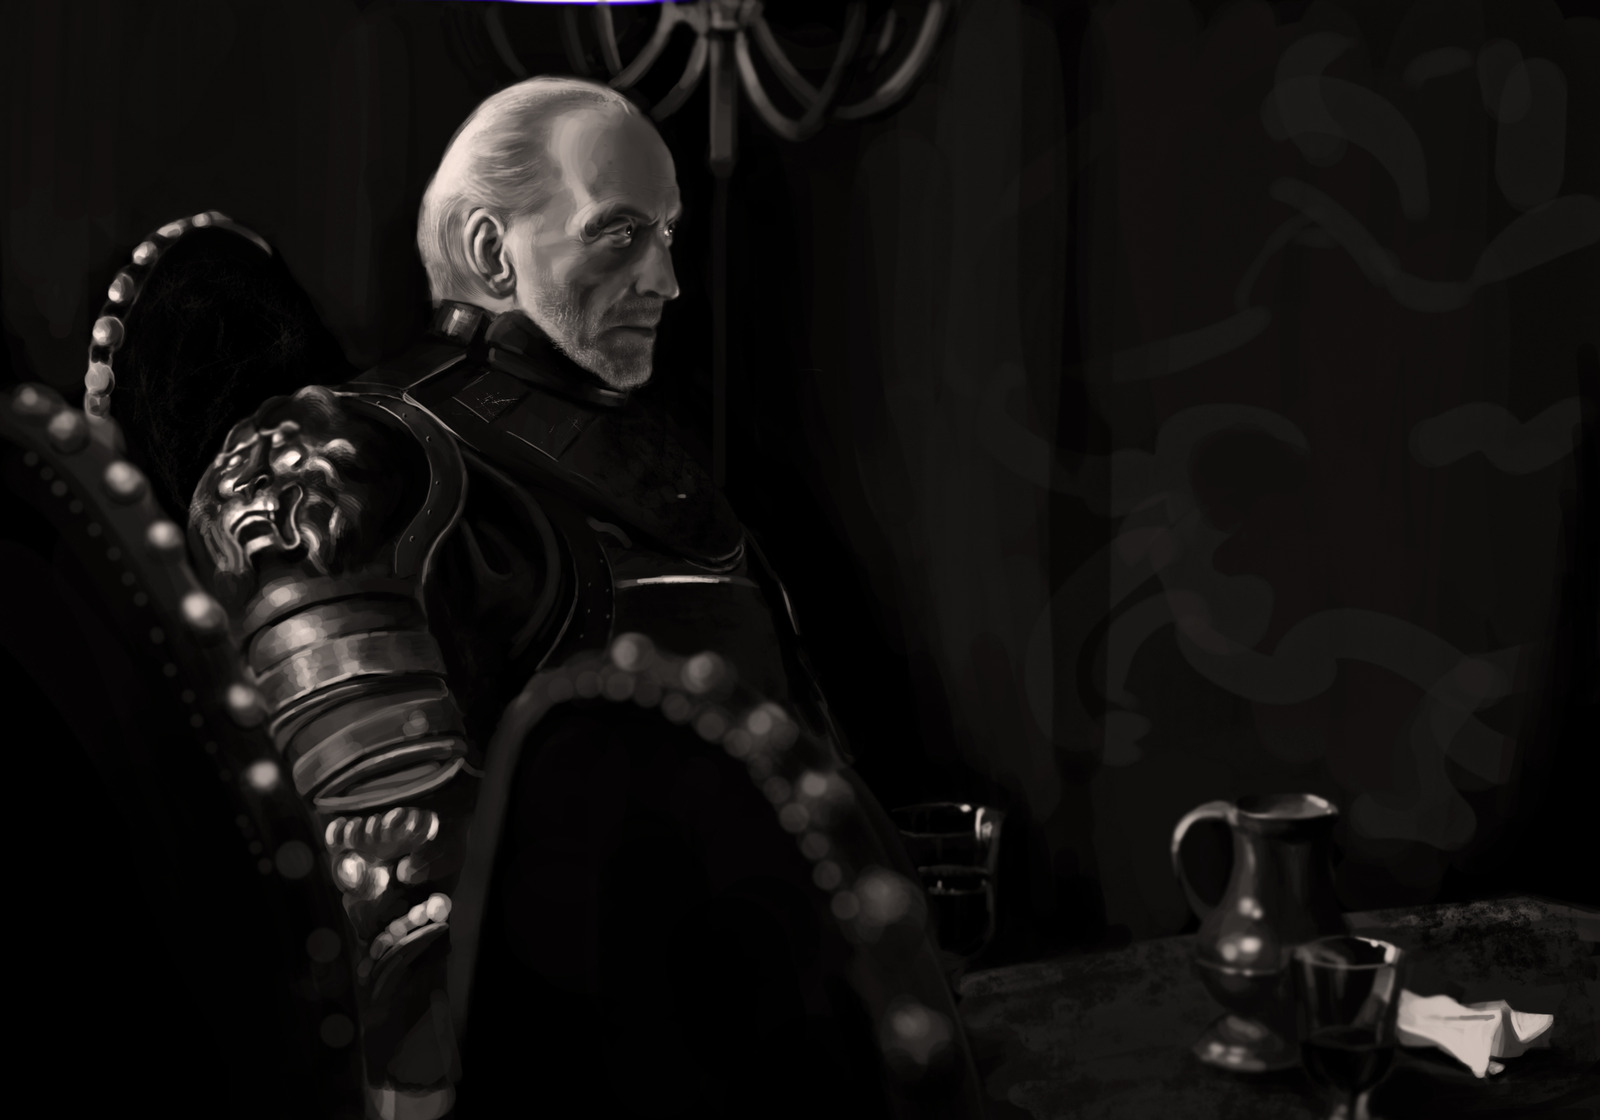 game, Of, Thrones, Tywin, Lannister, Charles, Dance, Drawing, B w, Fantasy, Sci fi Wallpaper